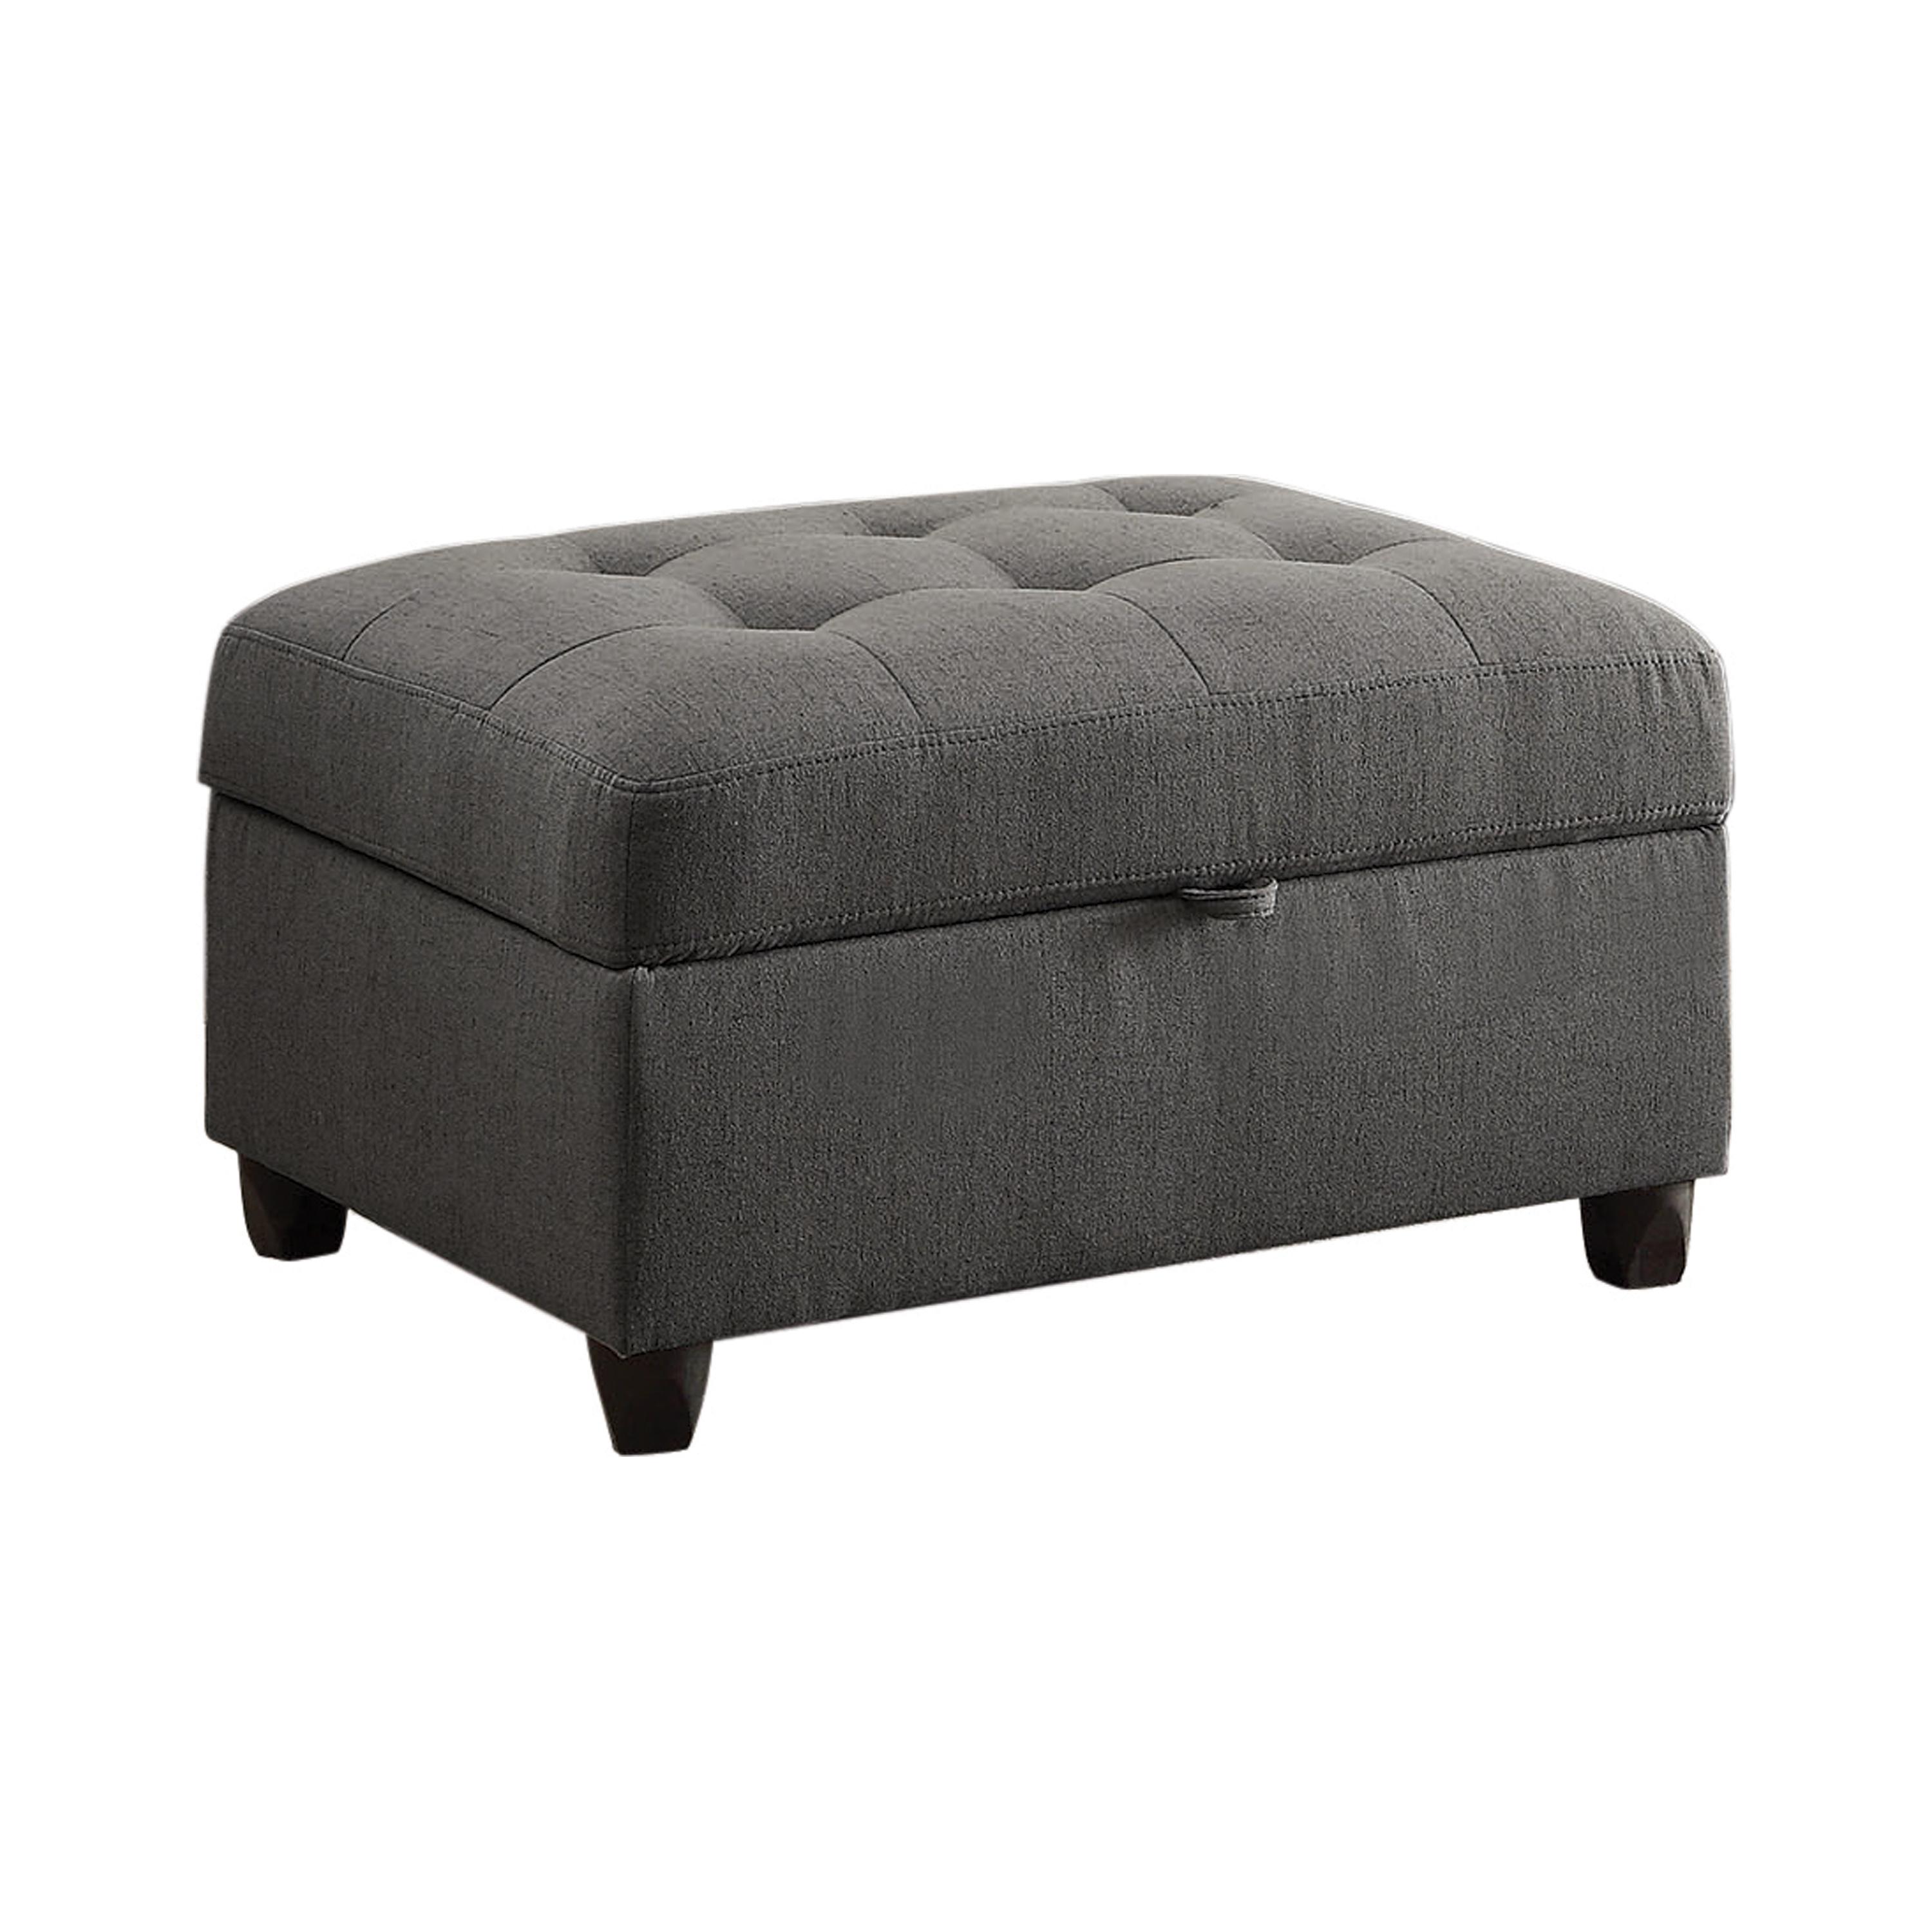 Transitional Ottoman 500414 Stonenesse 500414 in Gray 